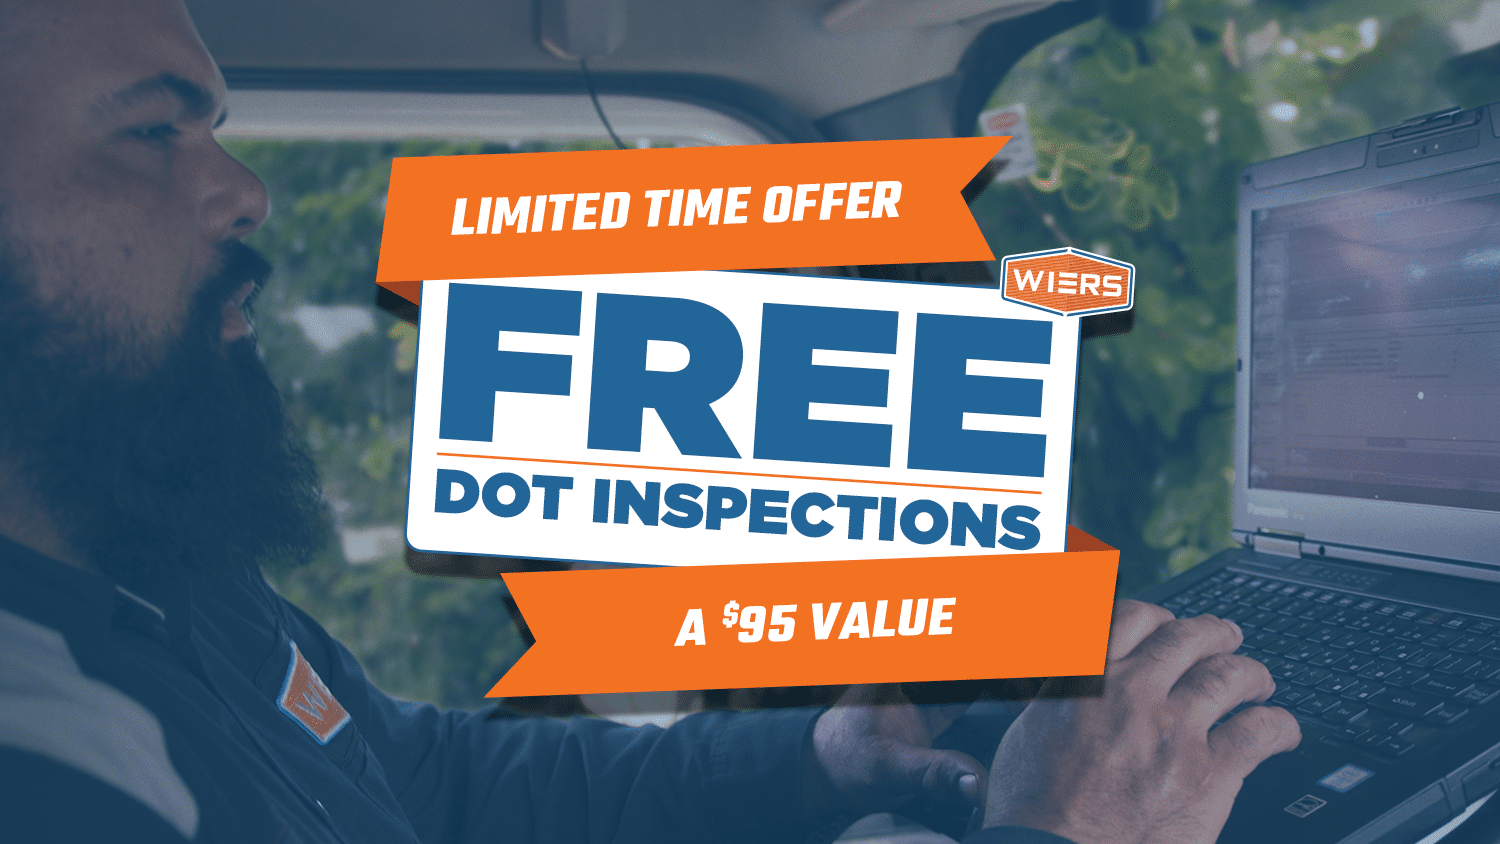 Get a Free DOT Inspection!